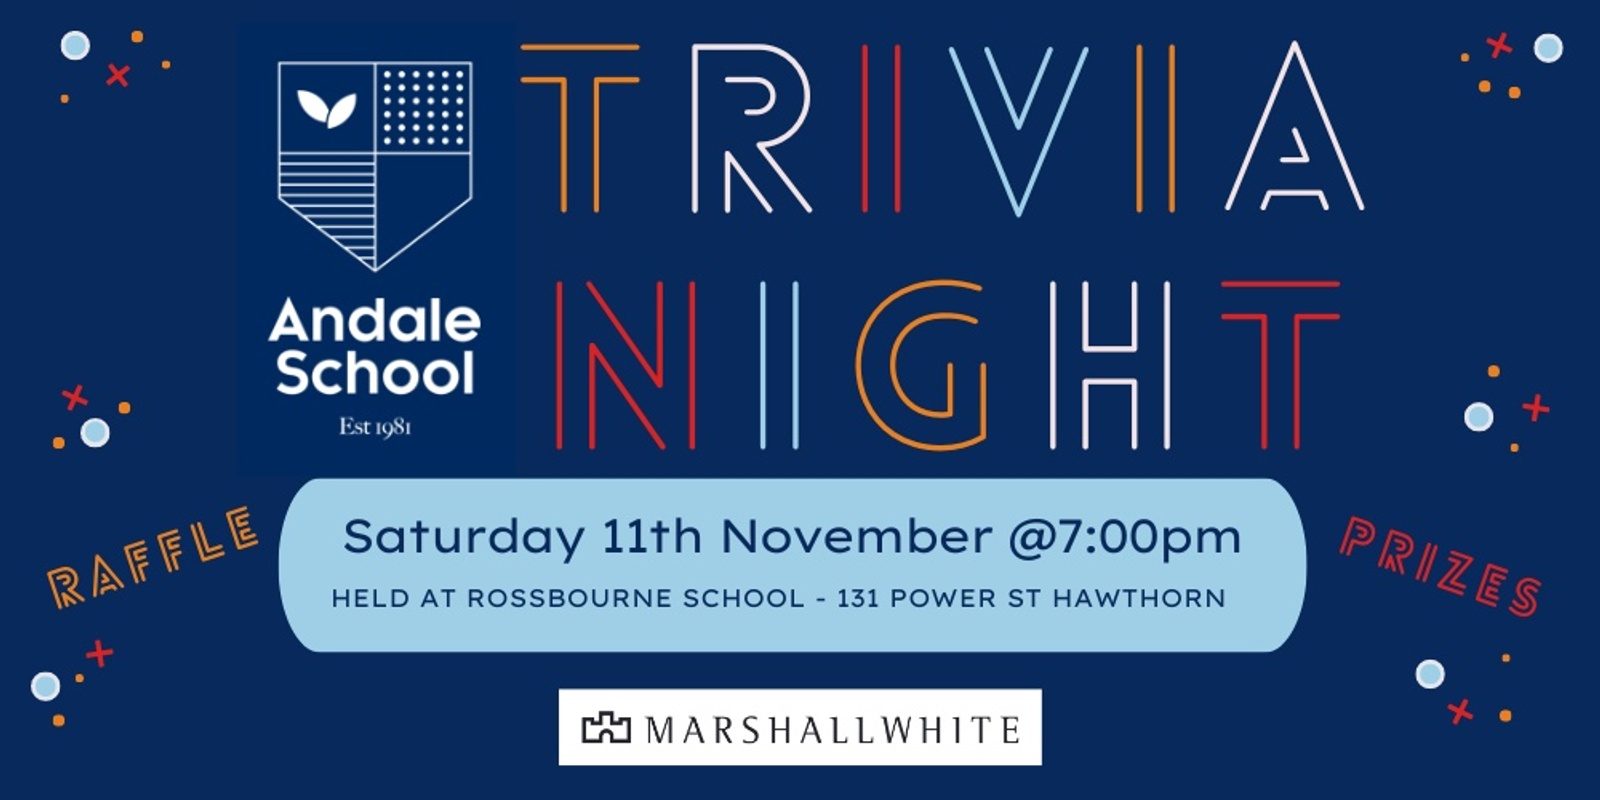 Banner image for Andale School Trivia Night